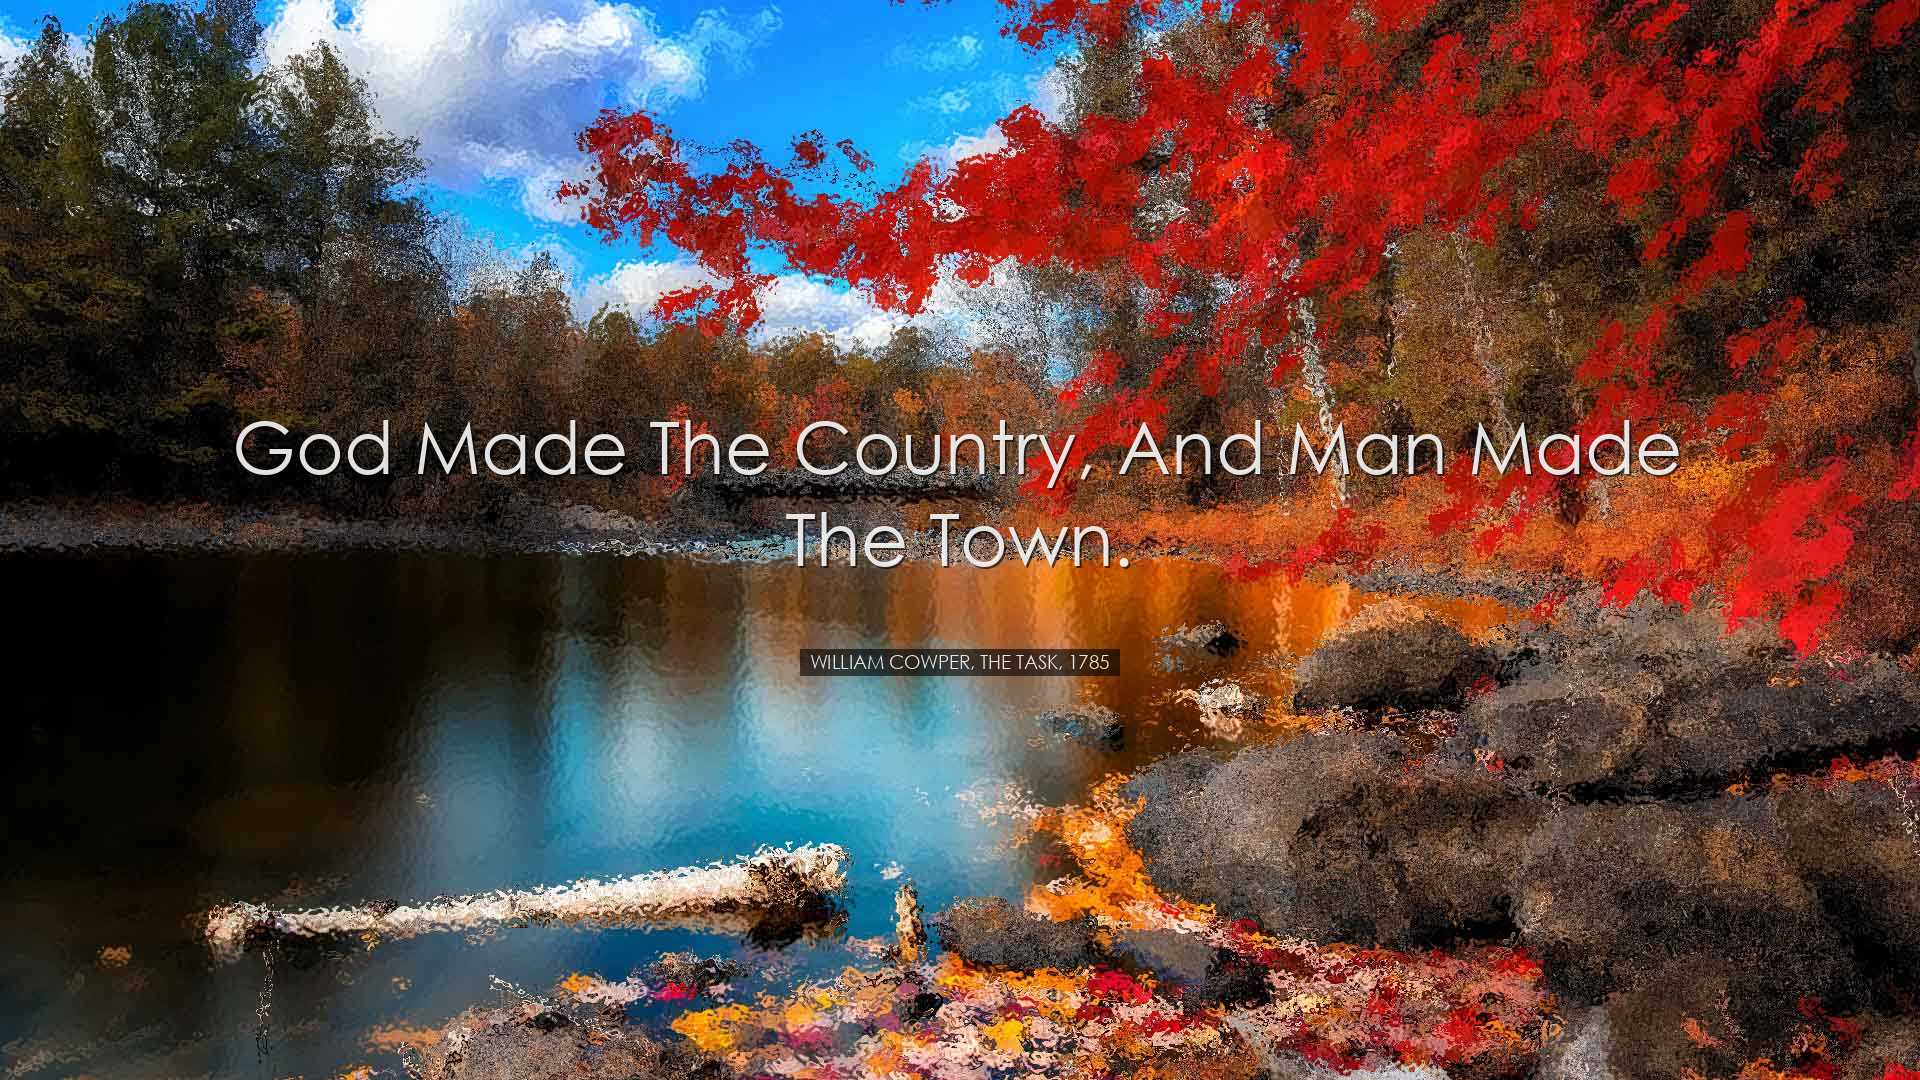 God made the country, and man made the town. - William Cowper, The